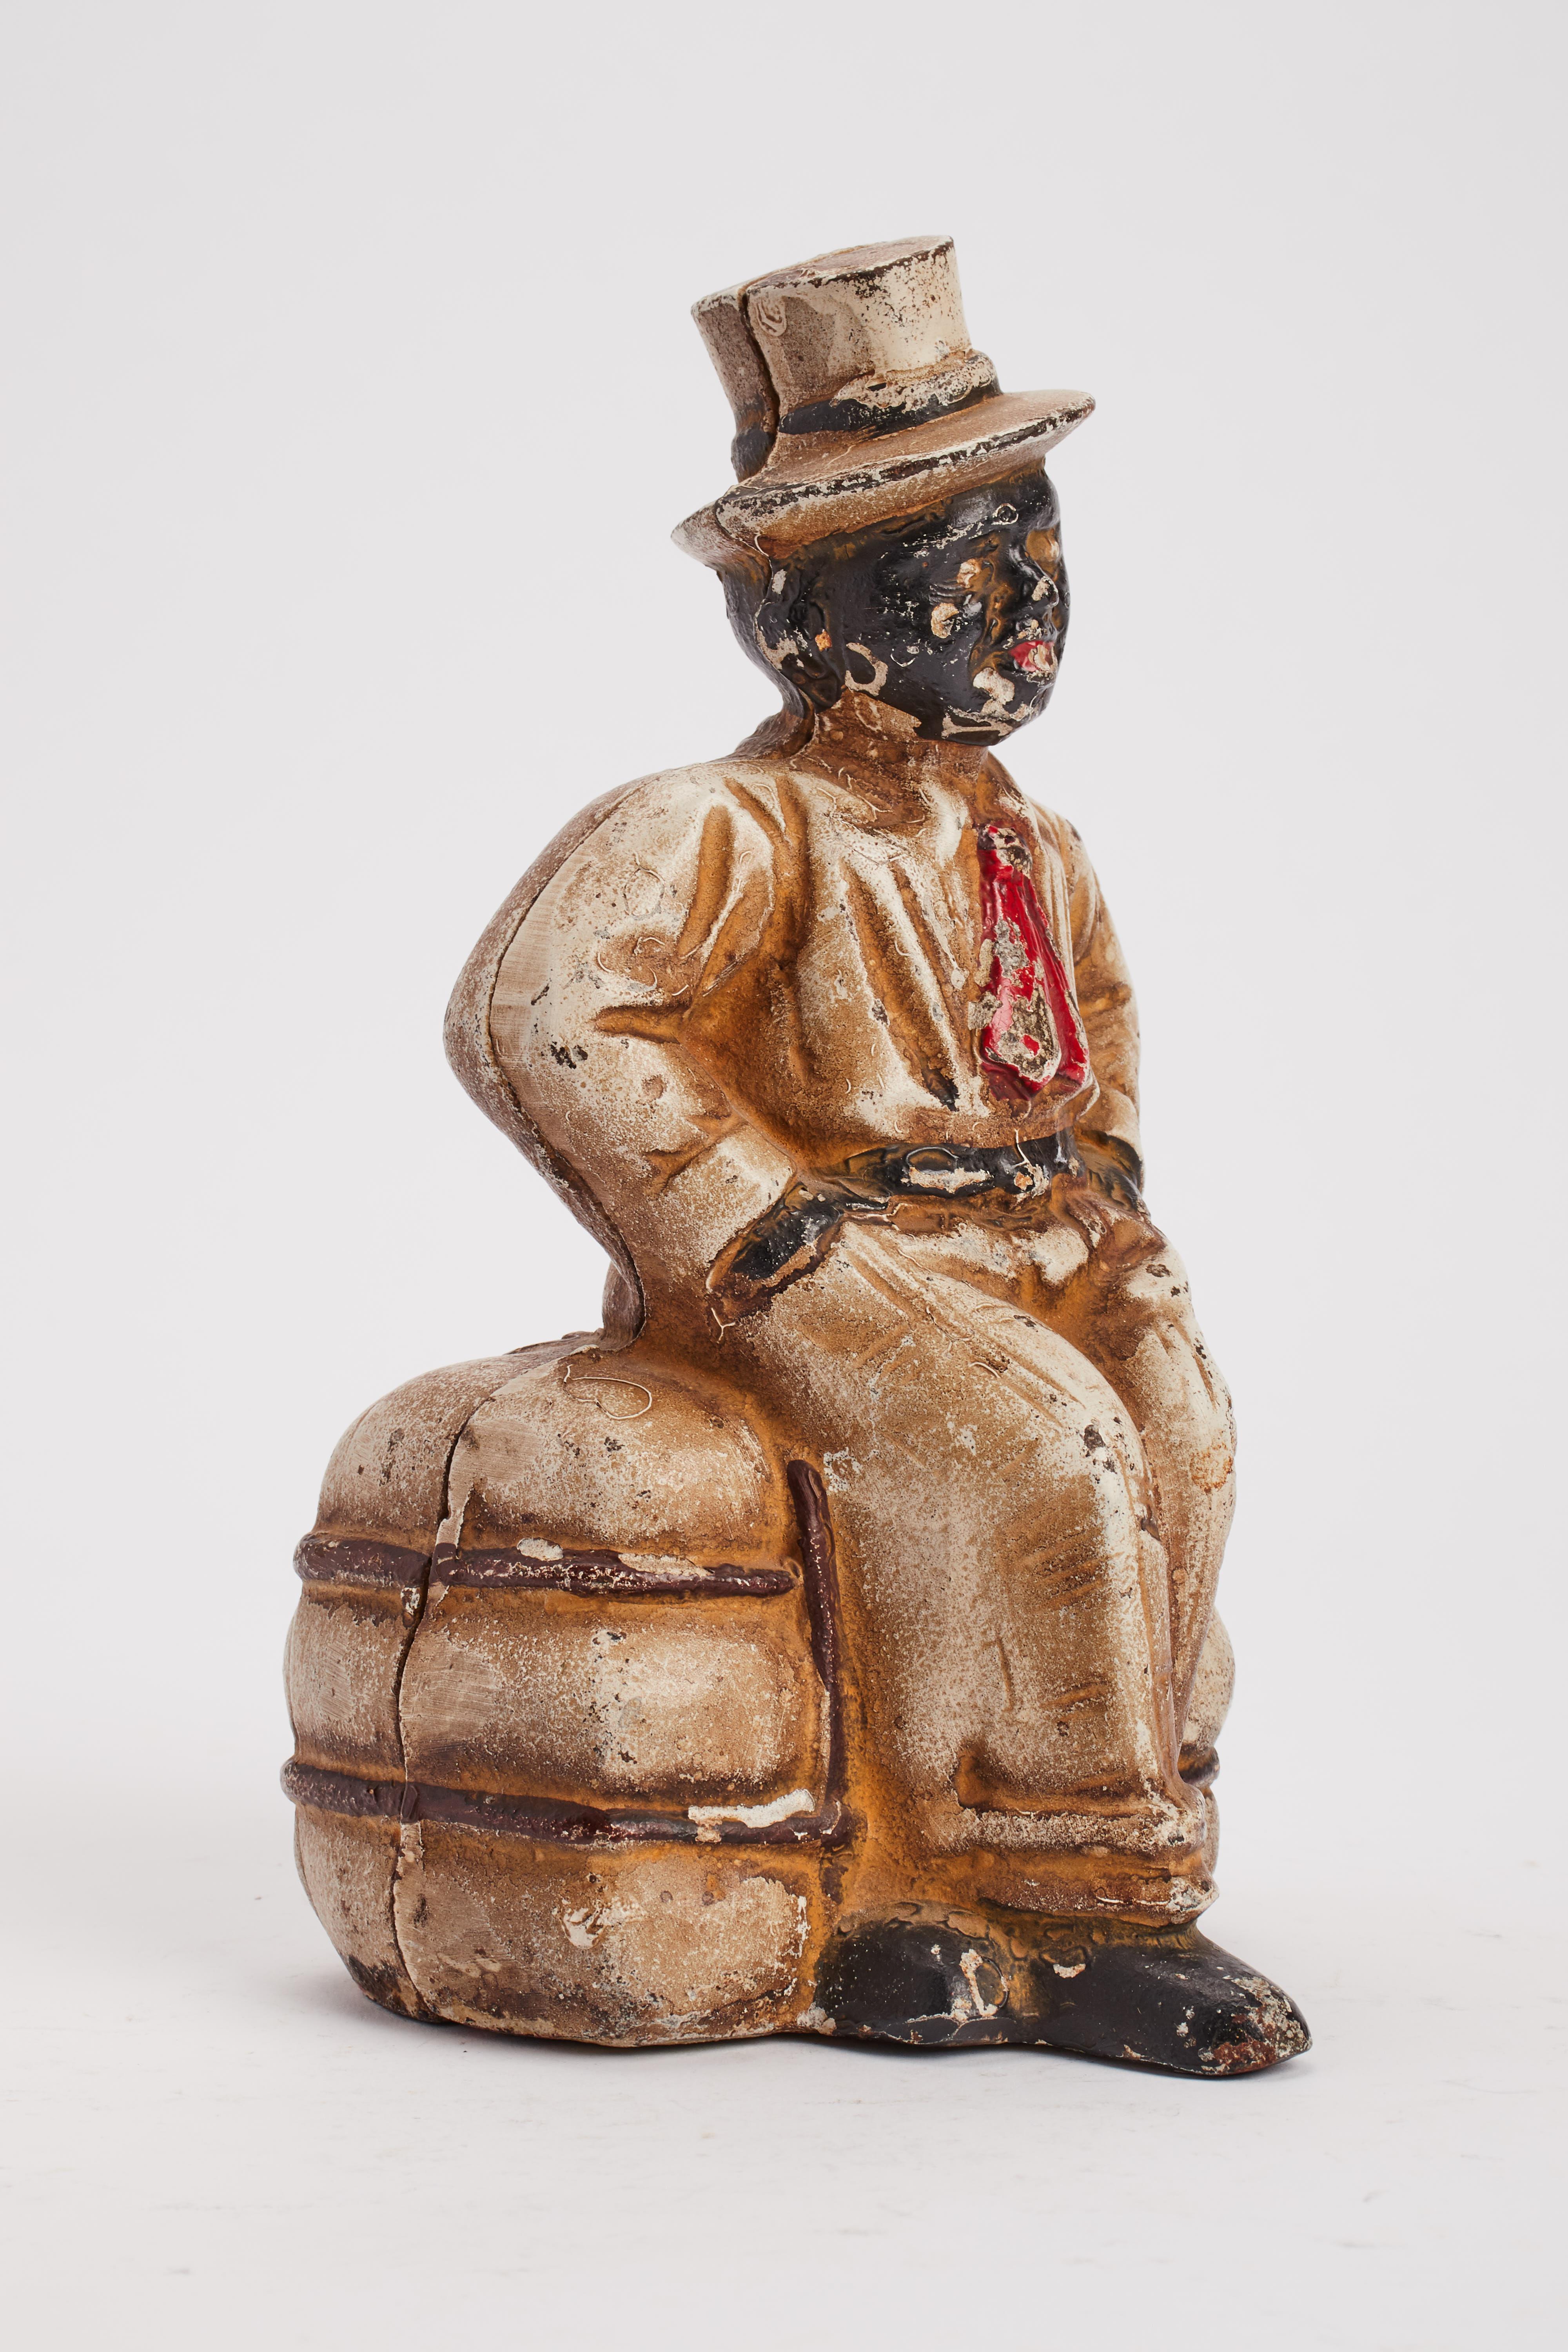 Painted cast iron money Bank depicting an Afro-American sitting on a cotton bale. USA 1920 ca.